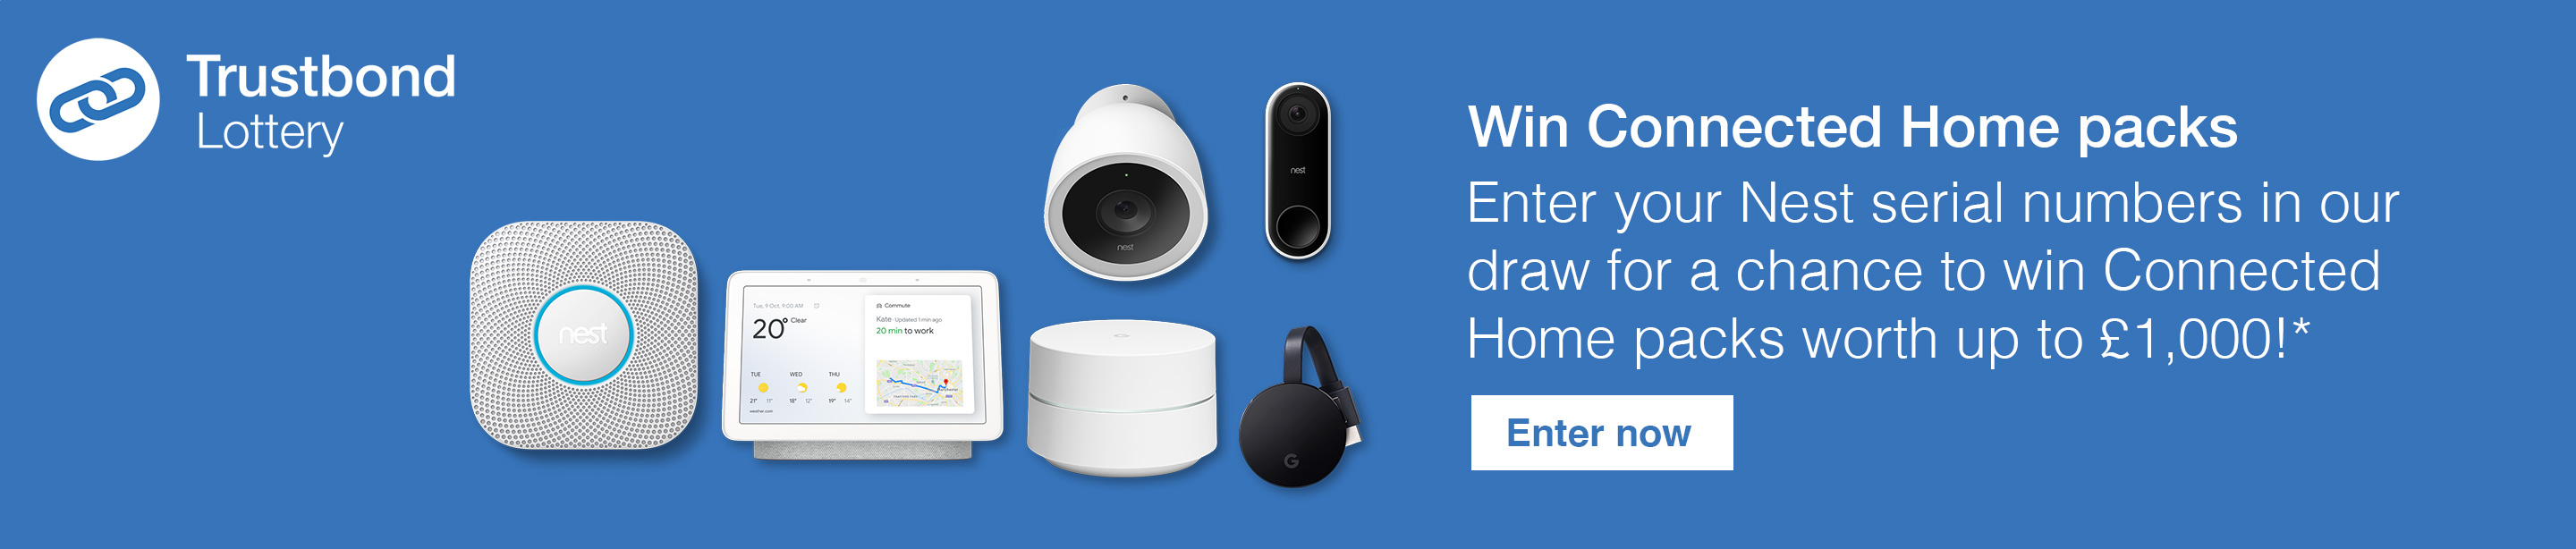 Win Connected Home Packs